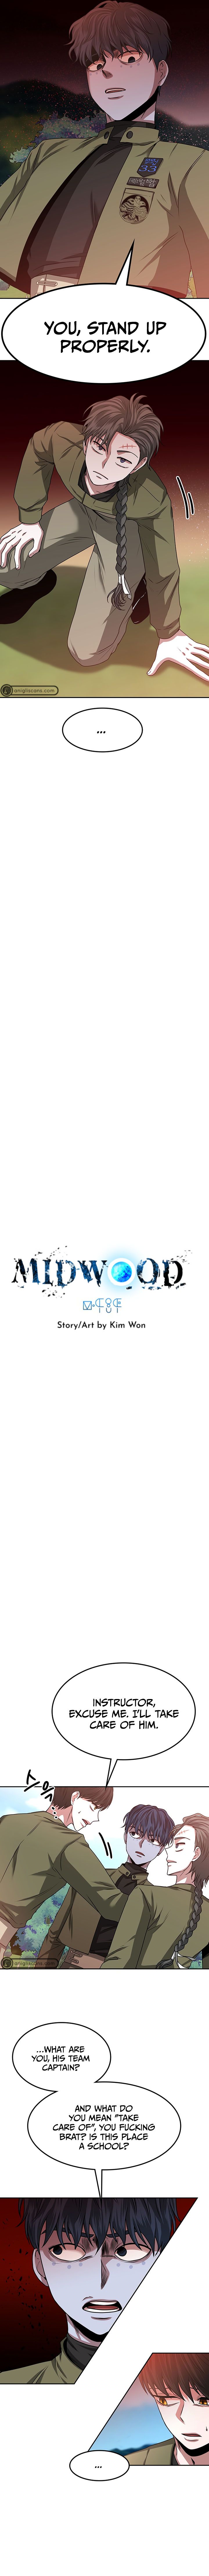 Midwood Chapter 9 #4